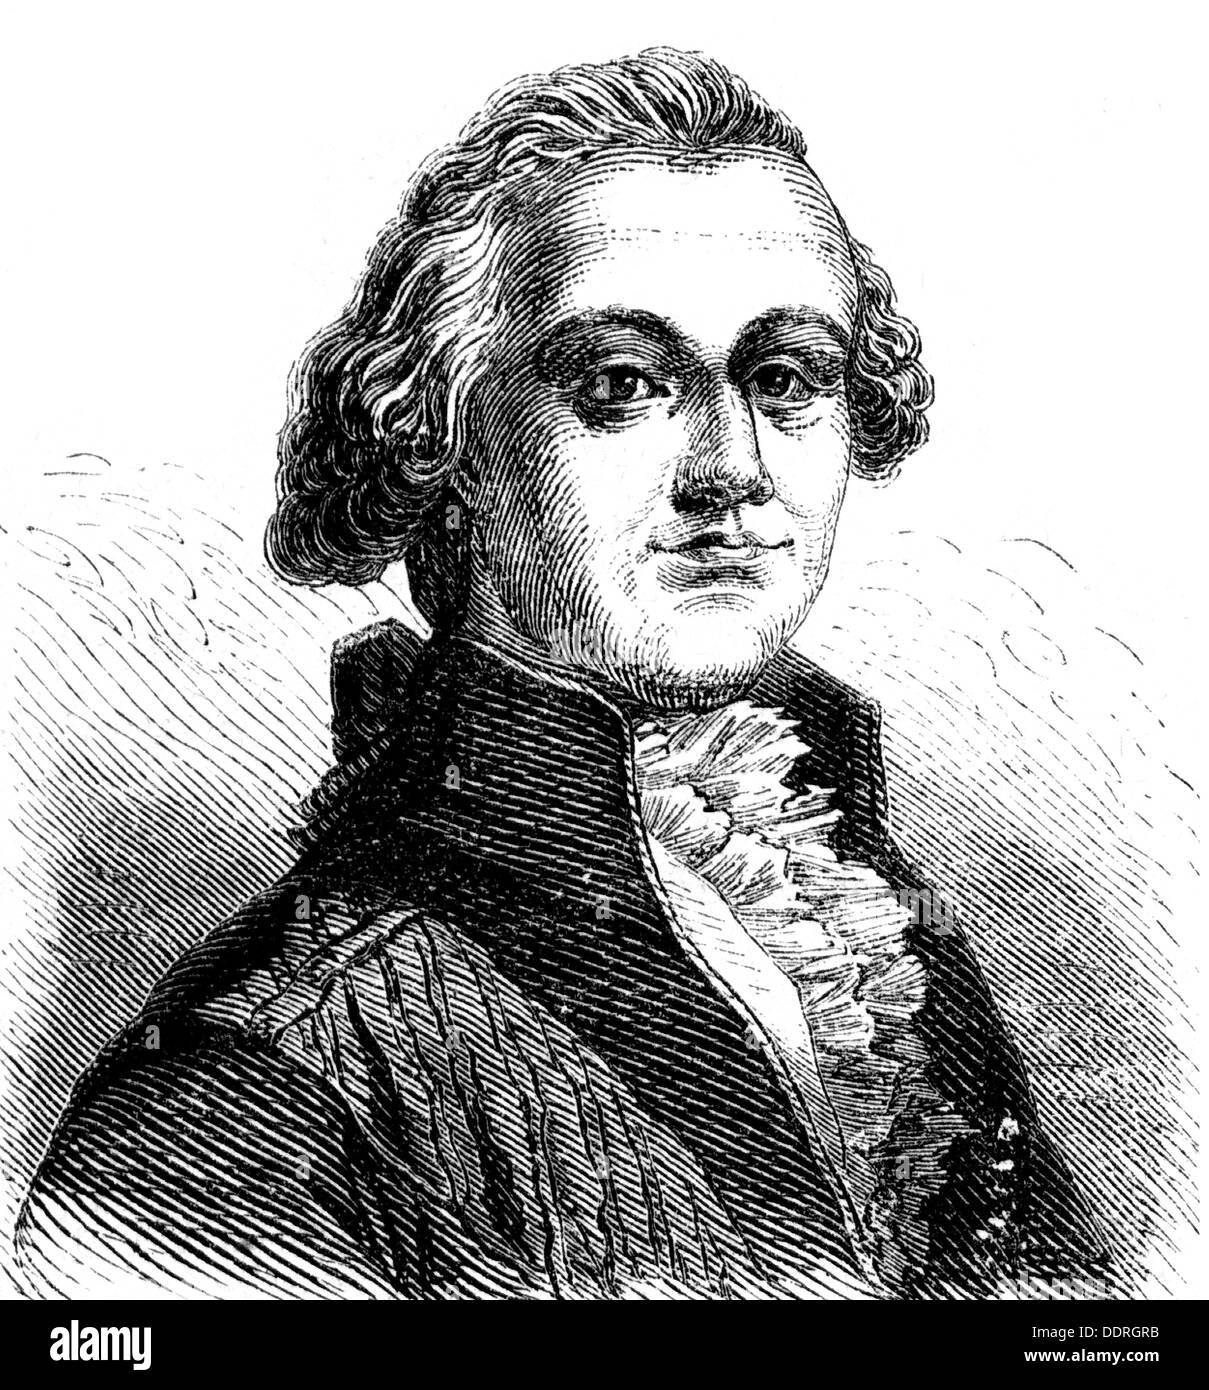 Bernstorff, Andreas Peter Count of 28.8.1735 - 1.6.1797, German politician, Danish Foreign Minister 1773 - 1780 and 1784 - 1797, portrait, wood engraving, 19th century, Stock Photo